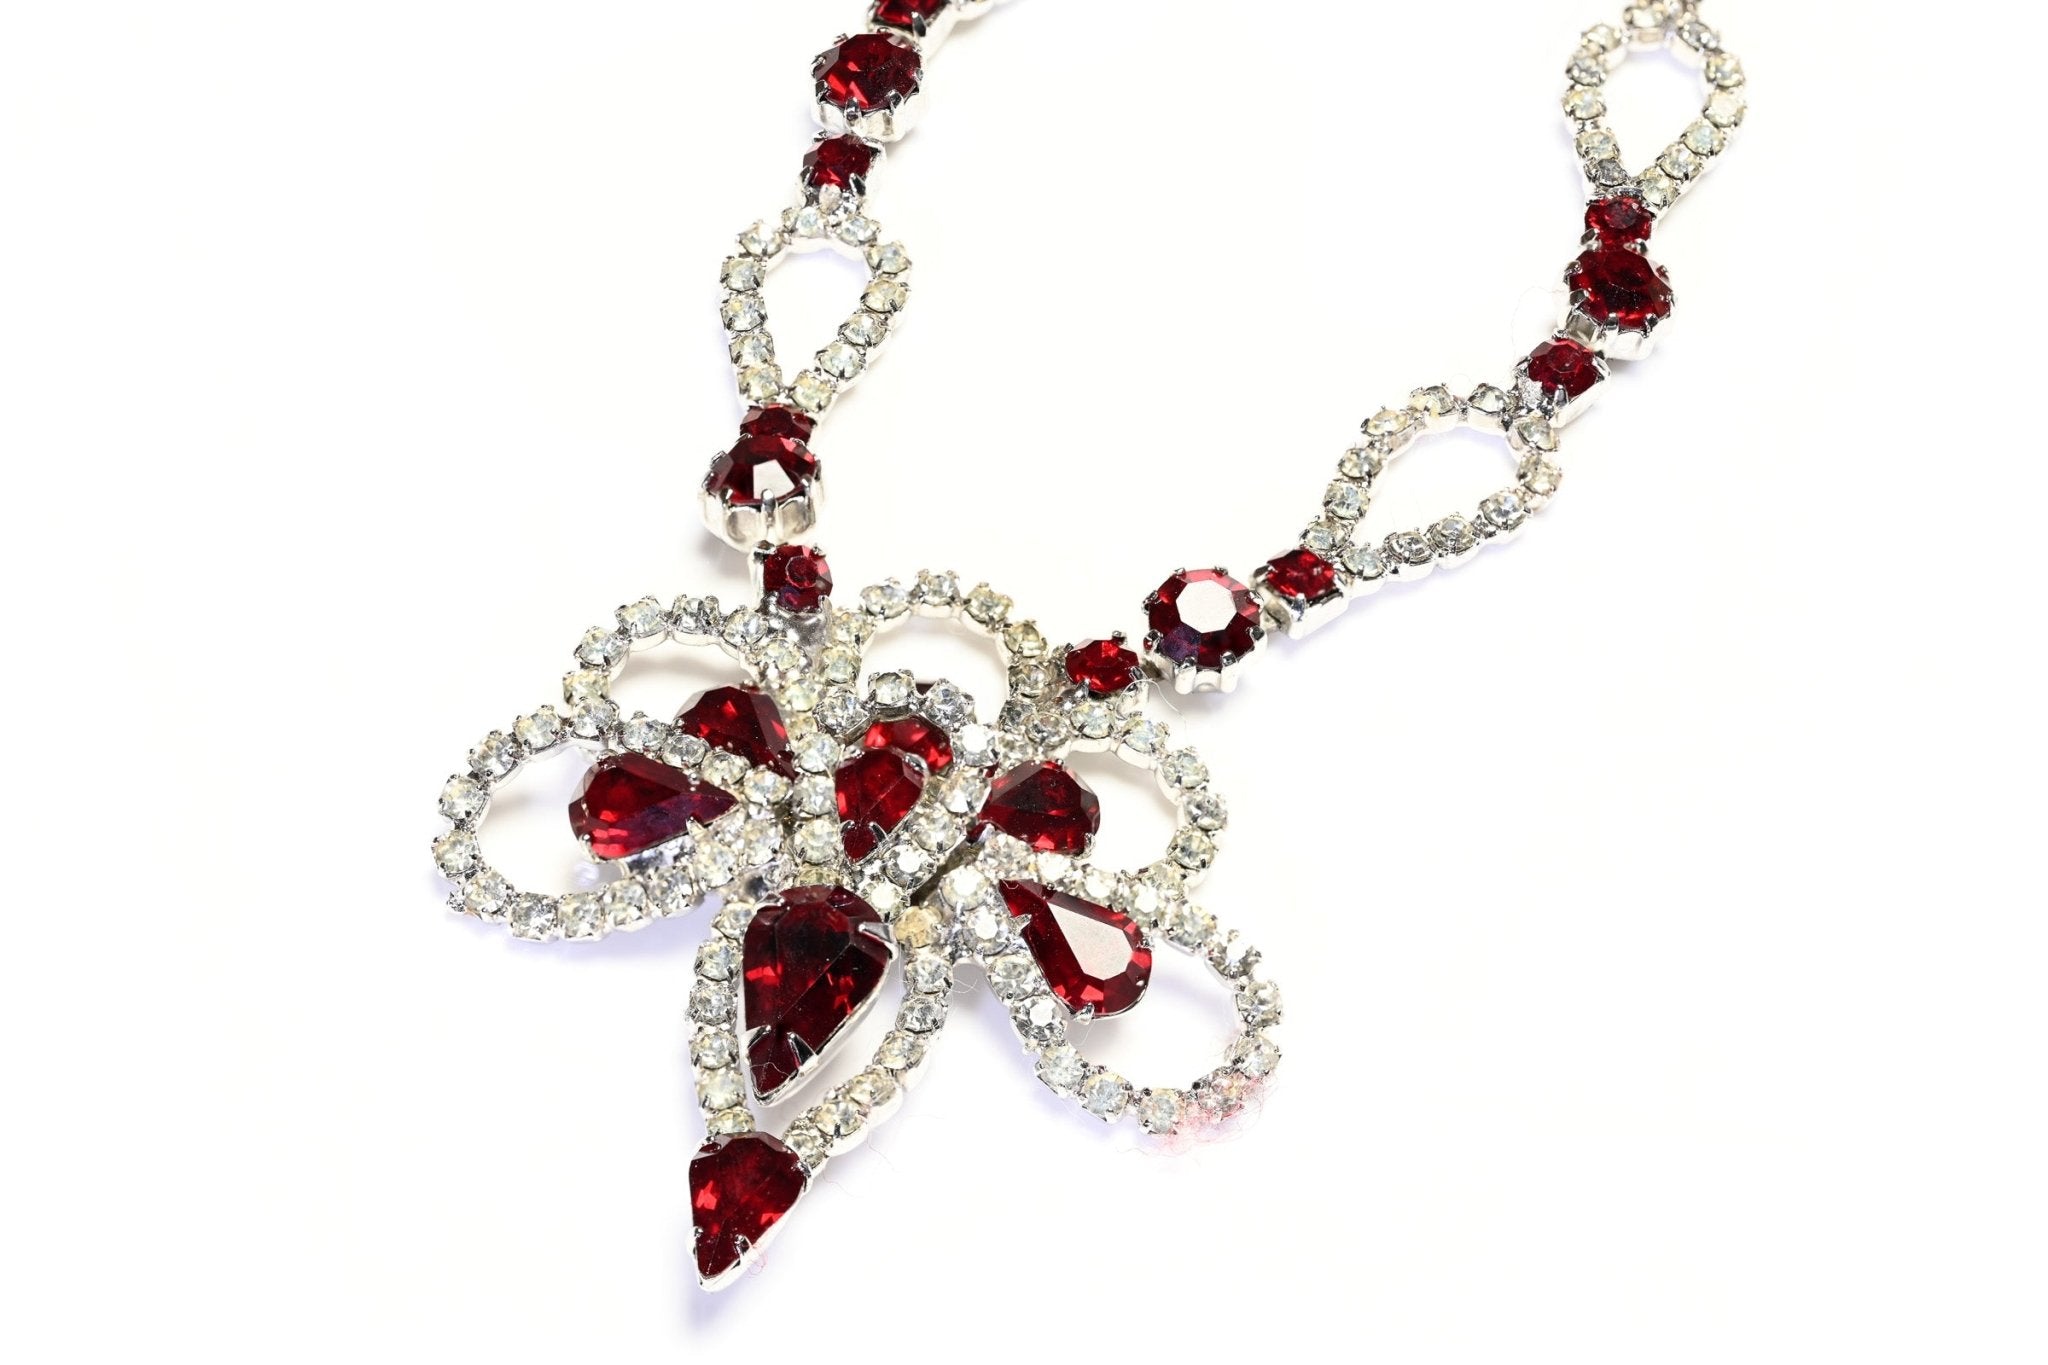 Vintage 1950’s Retro Rhodium Plated Red Crystal Flower Necklace